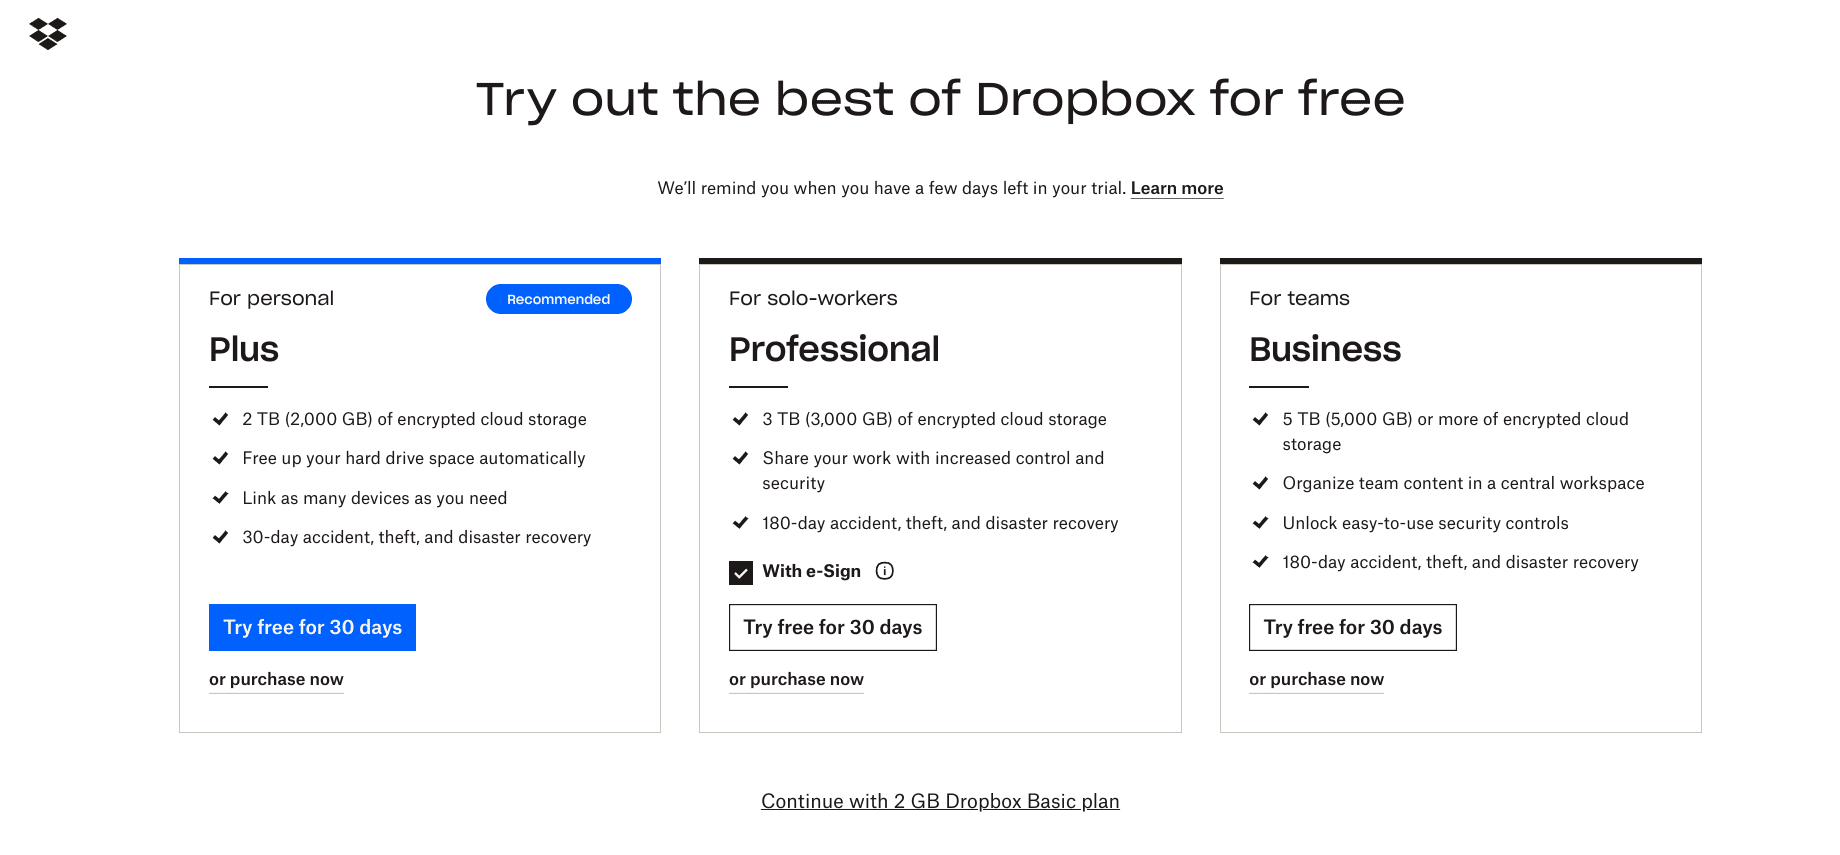 Dropbox's plans and pricing